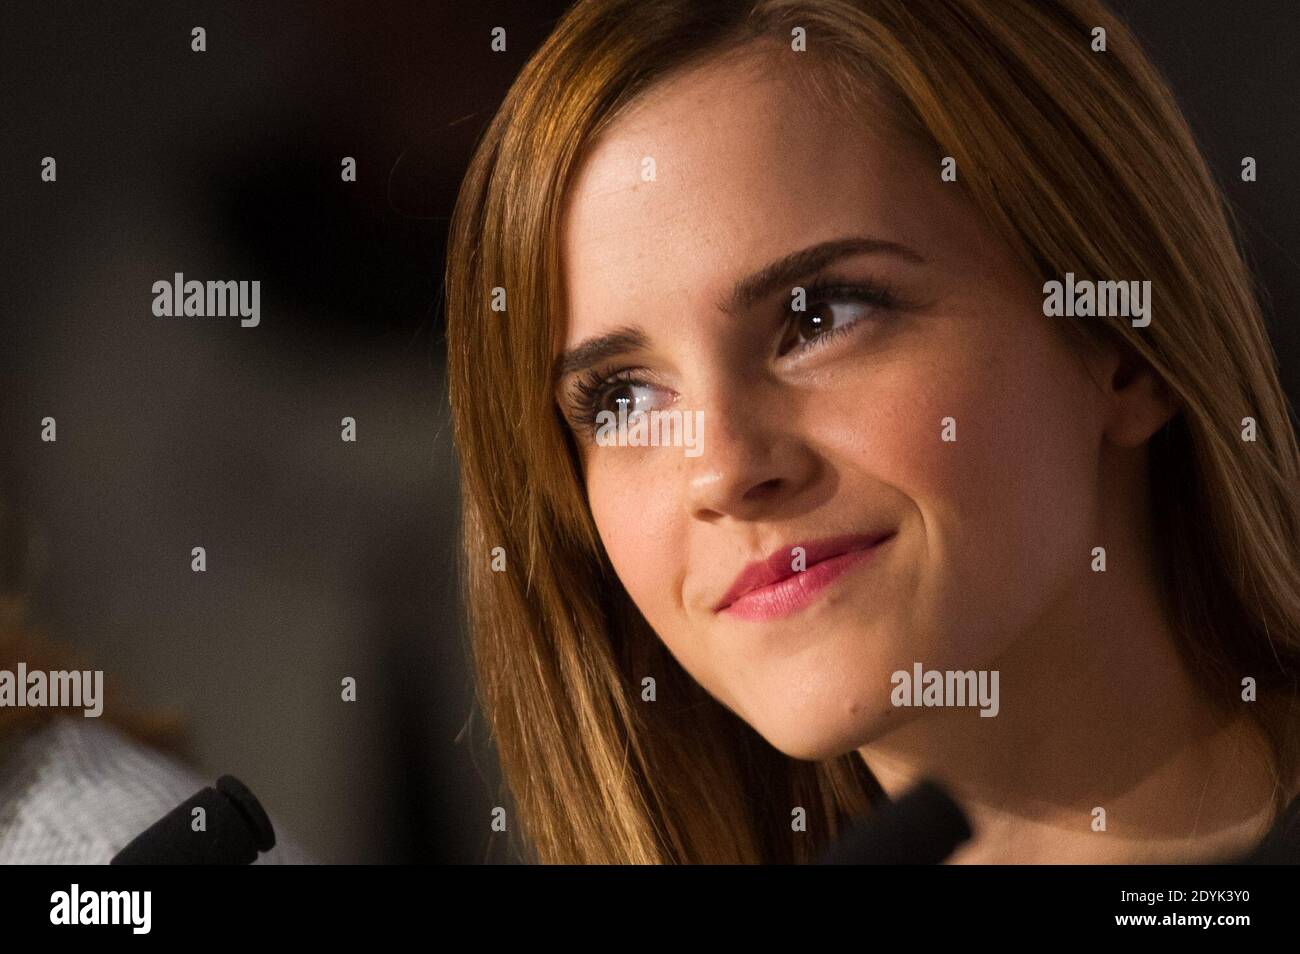 Emma Watson attends the 'Bling Ring' press conference during the 66th Annual Cannes Film Festival at the Palais des Festivals in Cannes, France on may 16th 2013. Photos by Florent Dupuy/POOL/ABACAPRESS.COM Stock Photo